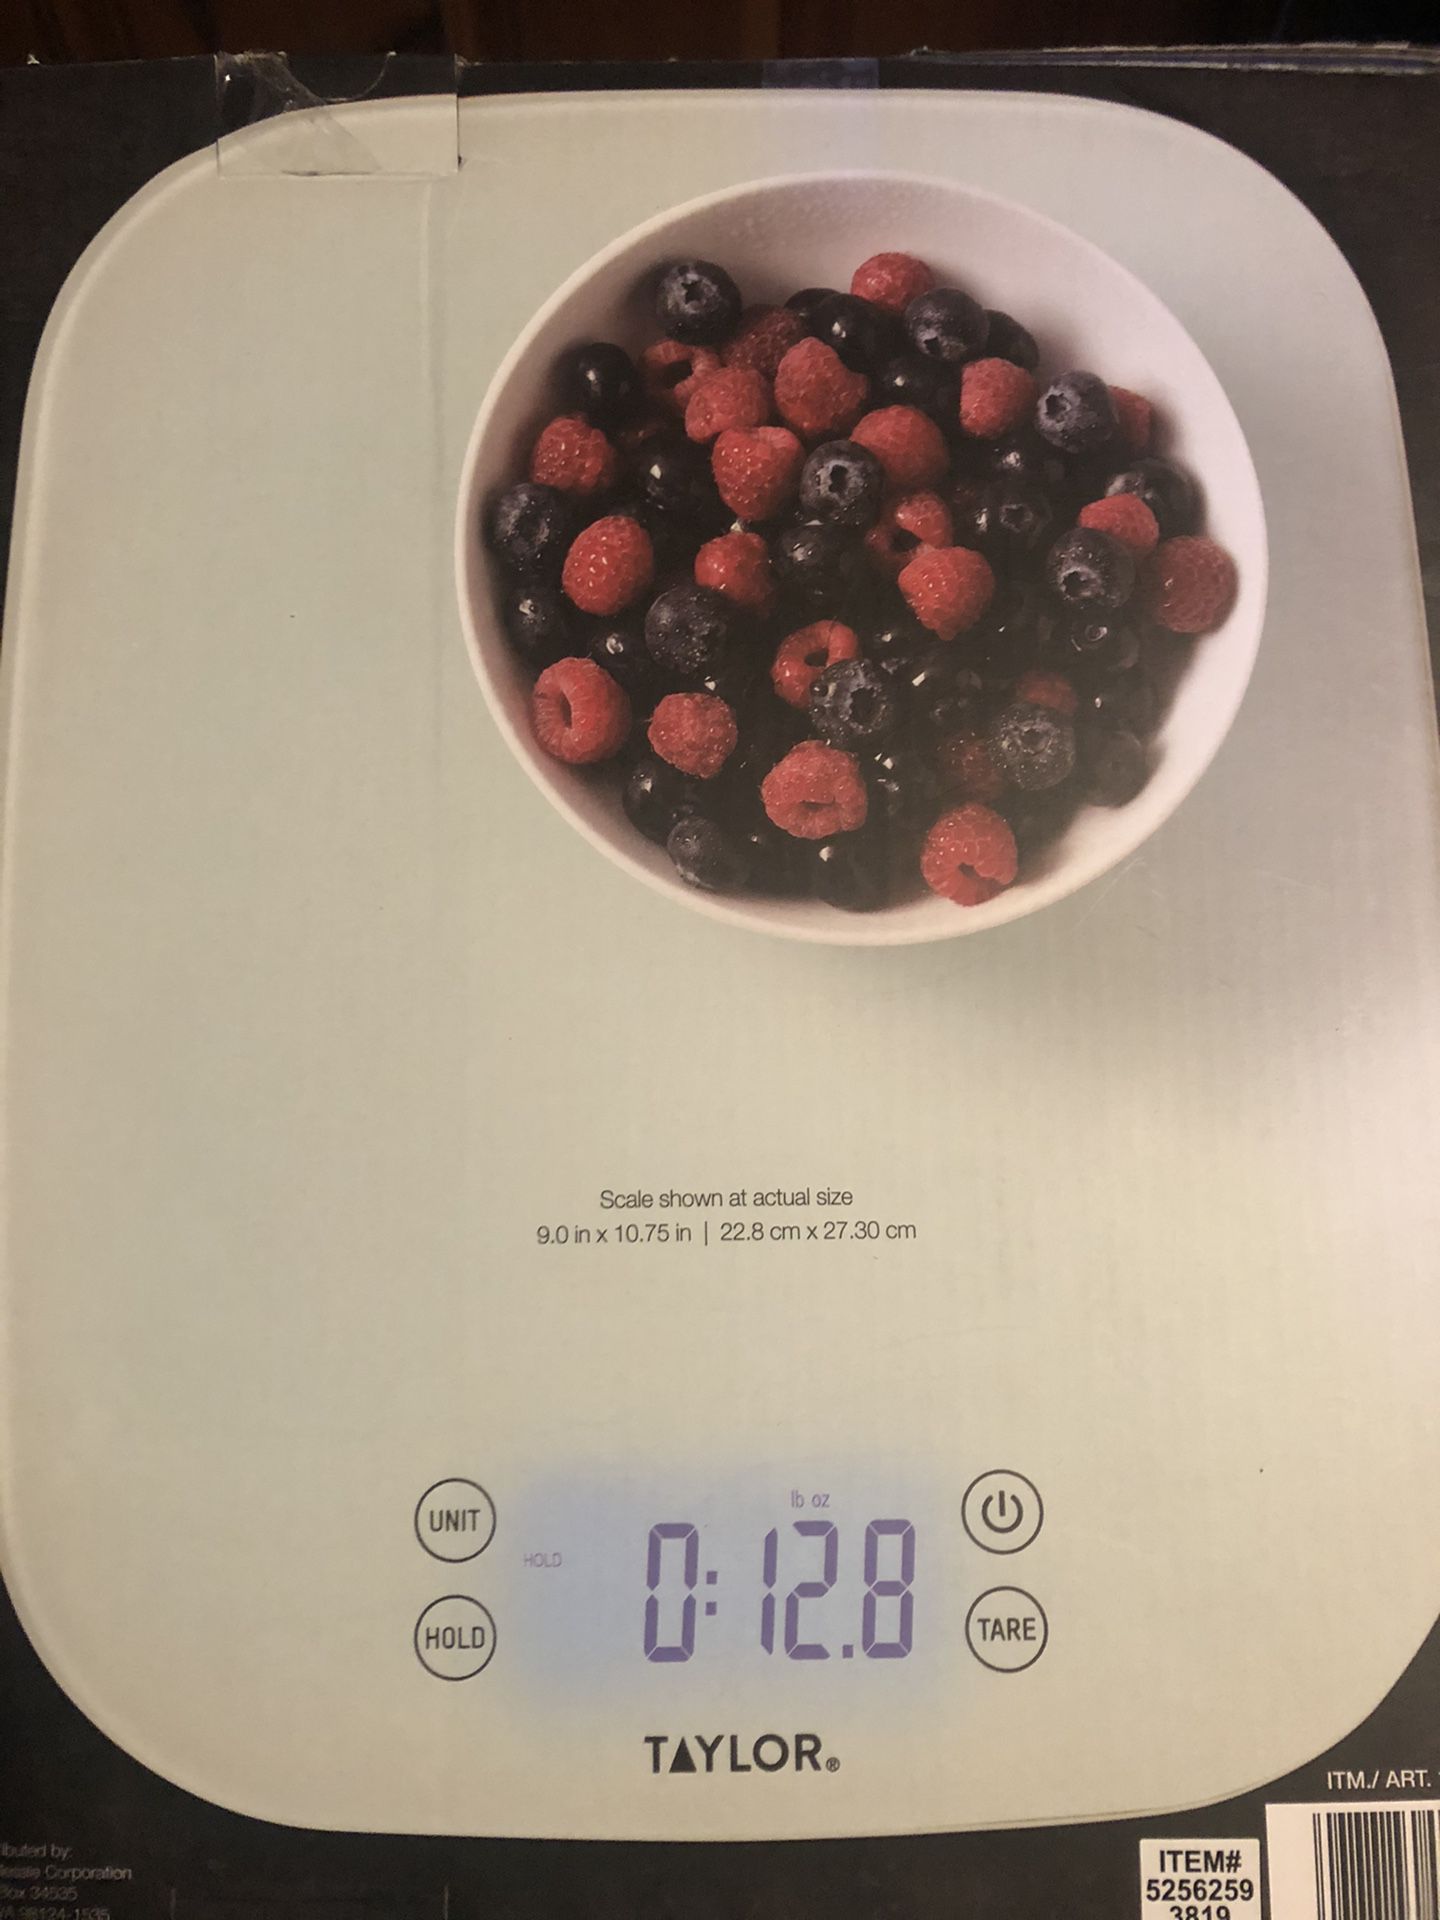 Taylor Digital Waterproof Kitchen Scale With Batteries Included